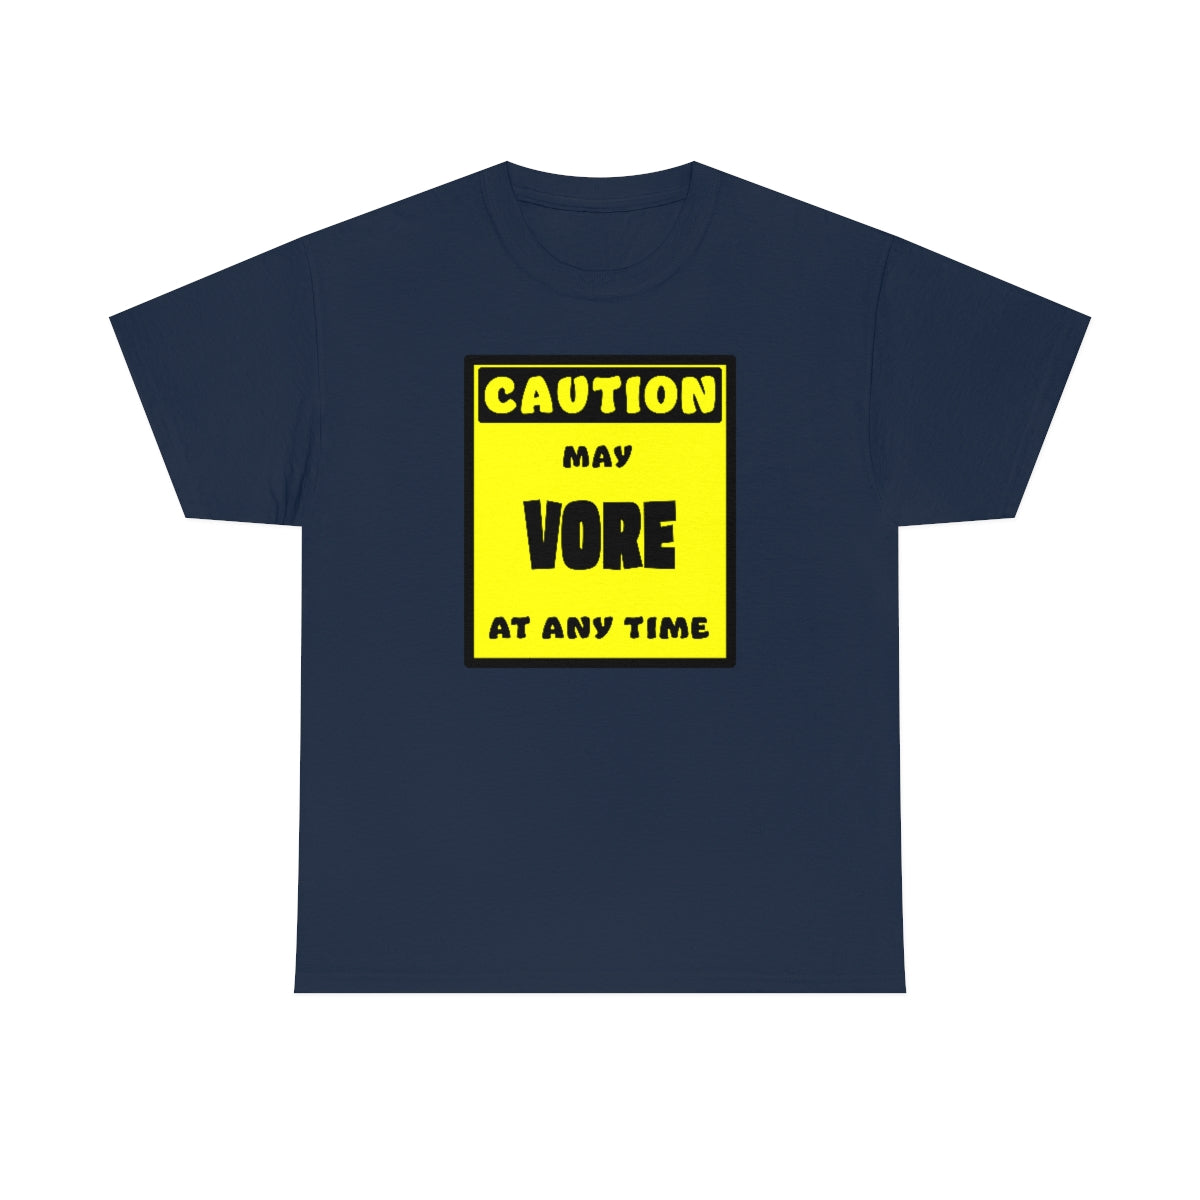 CAUTION! May VORE at any time! - T-Shirt T-Shirt AFLT-Whootorca Navy Blue S 